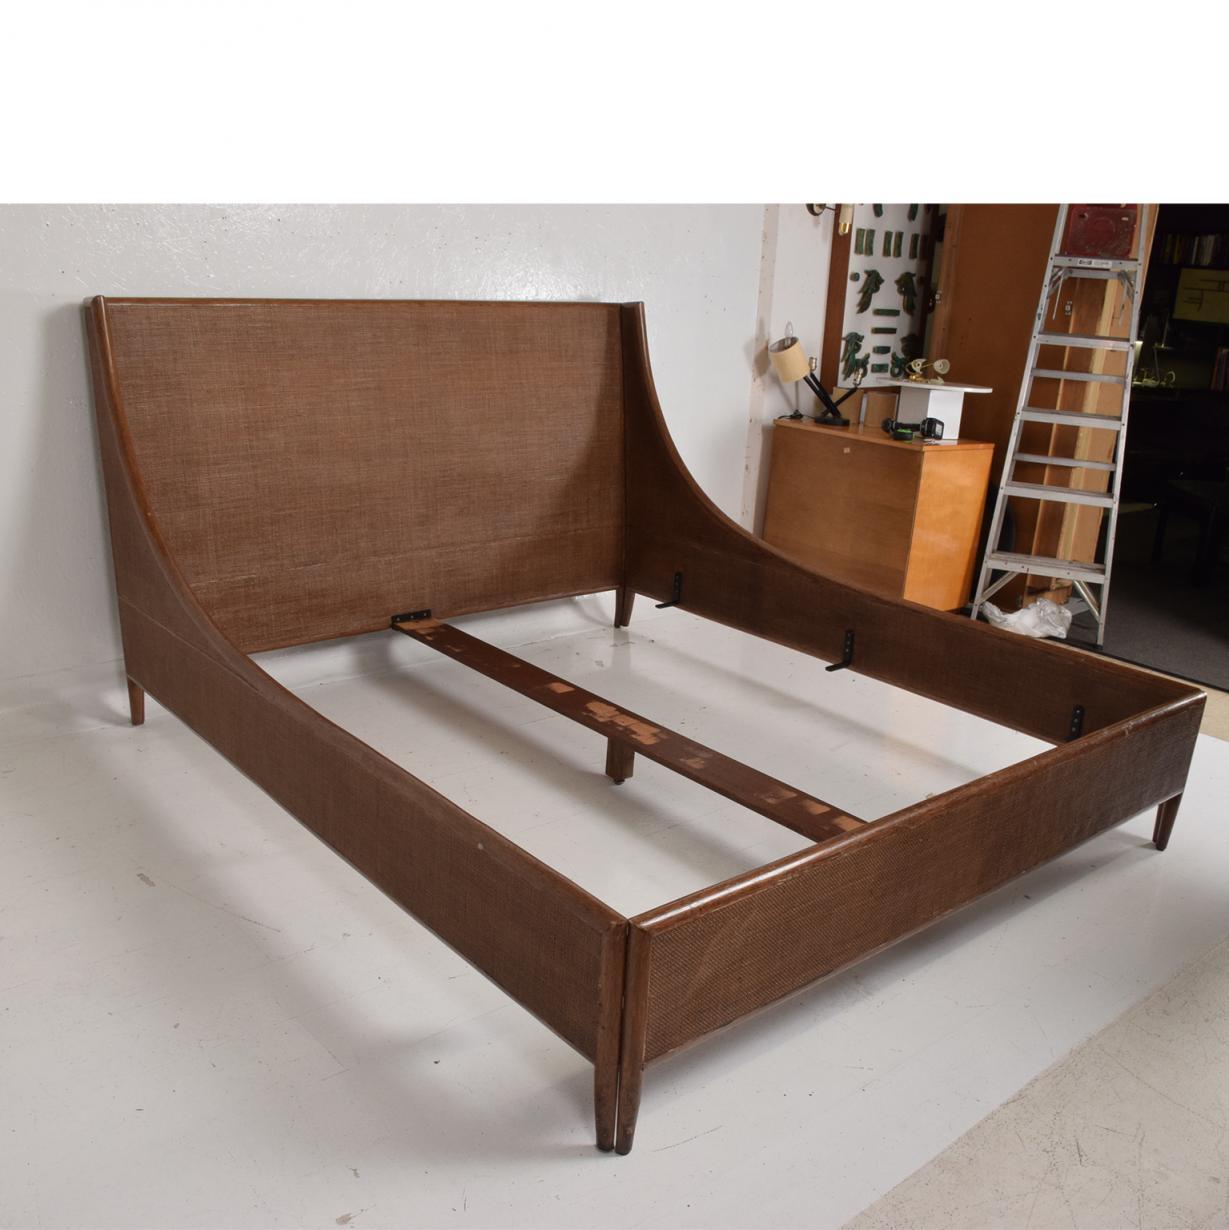 Lacquered Mid-Century Modern Cal King Bed Frame Designed By Barbara Barry for McGuire / BA